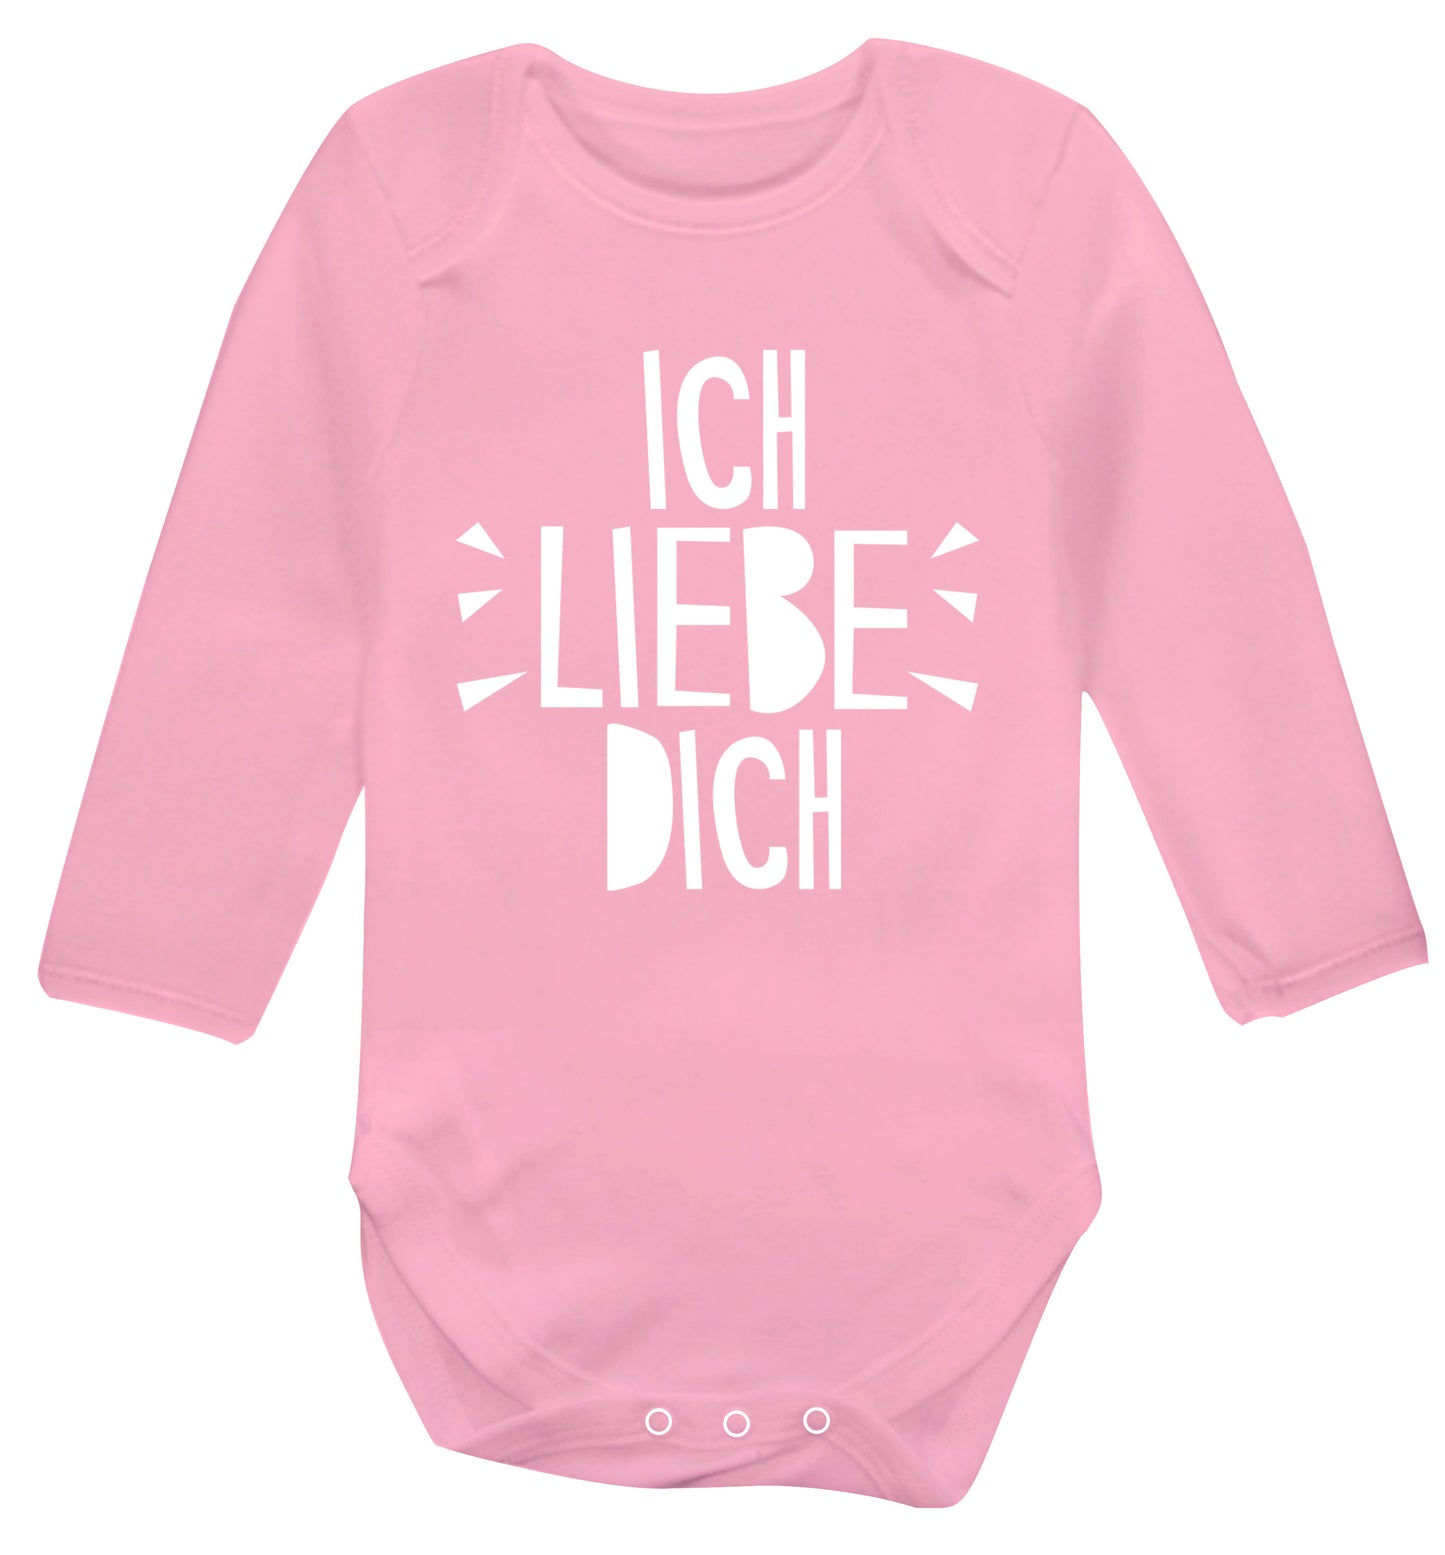 Ich liebe dich - I love you Baby Vest long sleeved pale pink 6-12 months